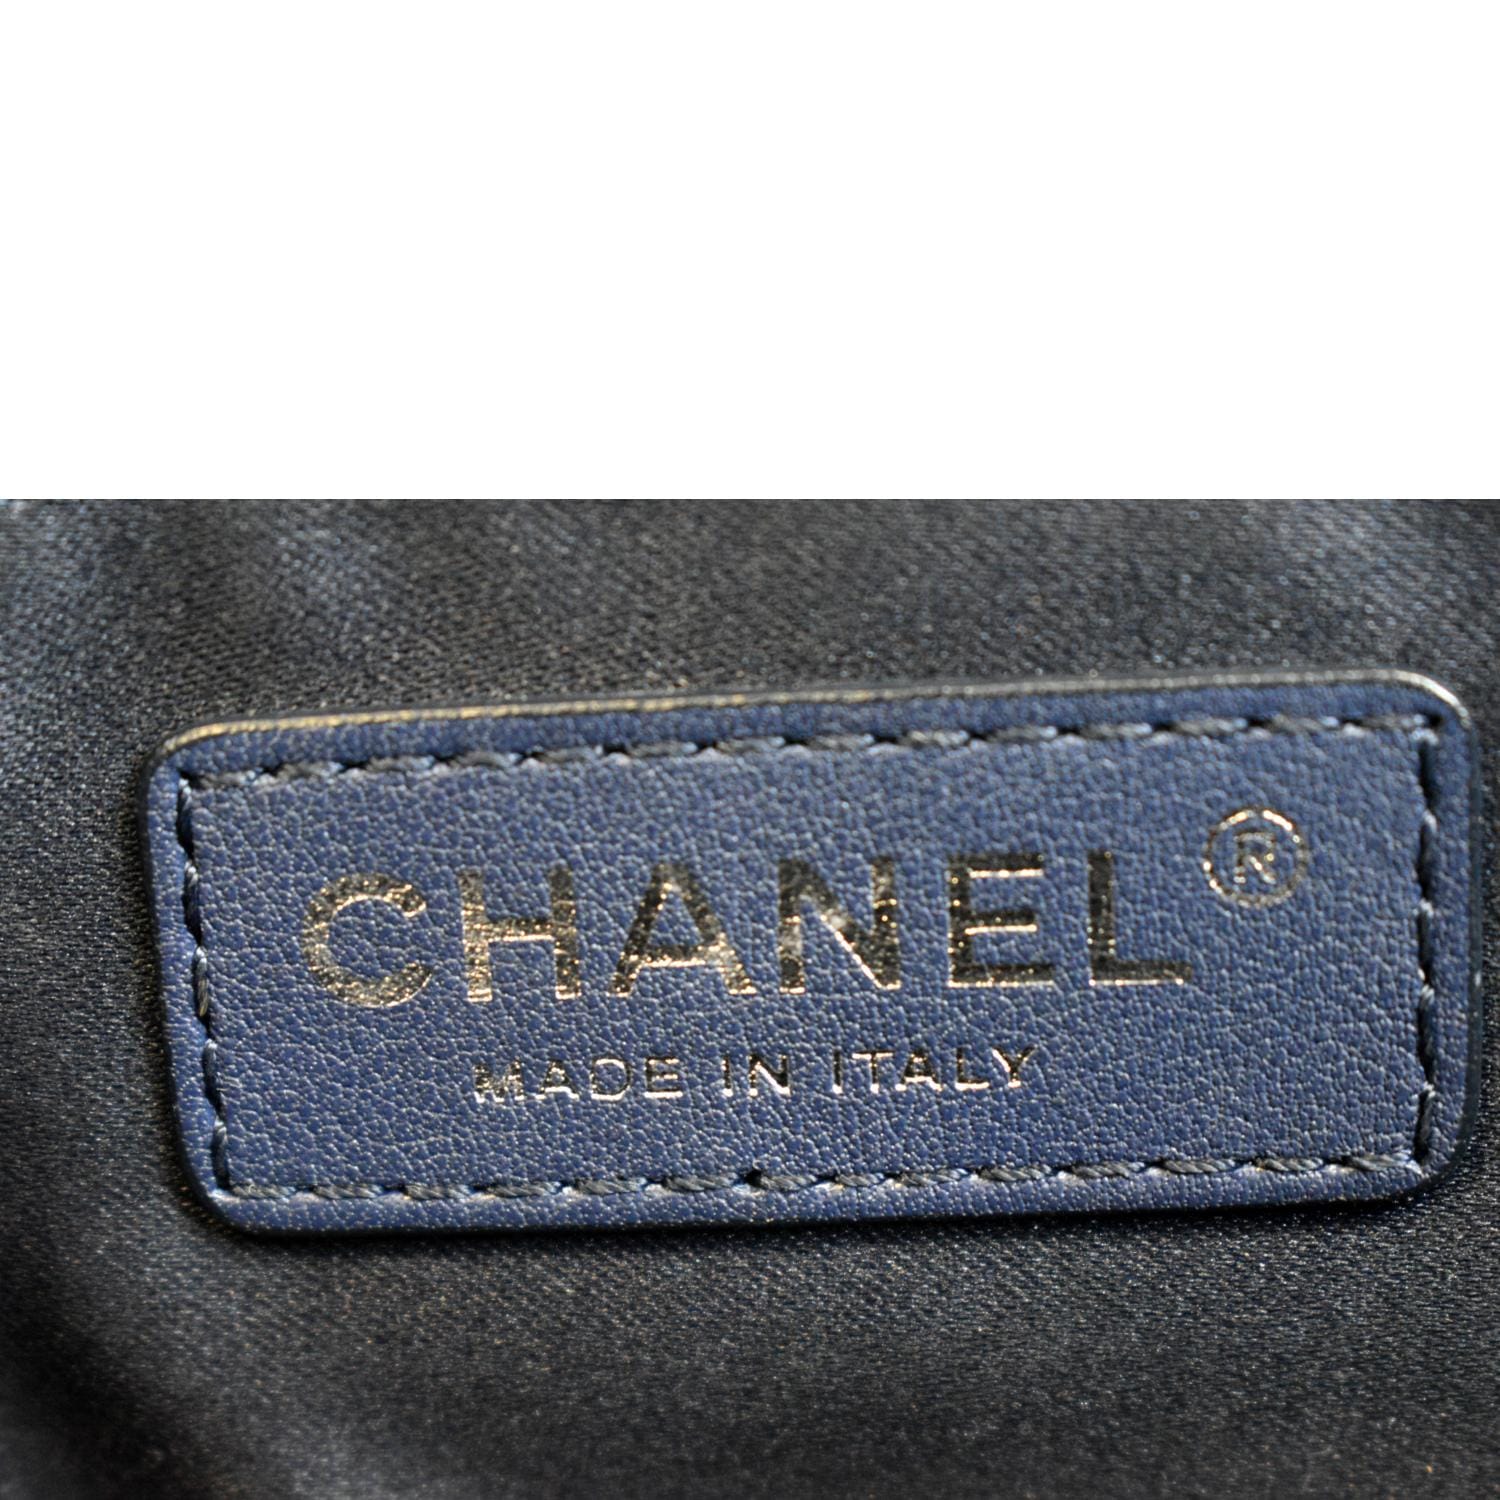 Chanel Navy Blue Quilted Lambskin Trendy CC Flap Bag With Chain Gold  Hardware, 2014 - 2015 Available For Immediate Sale At Sotheby's